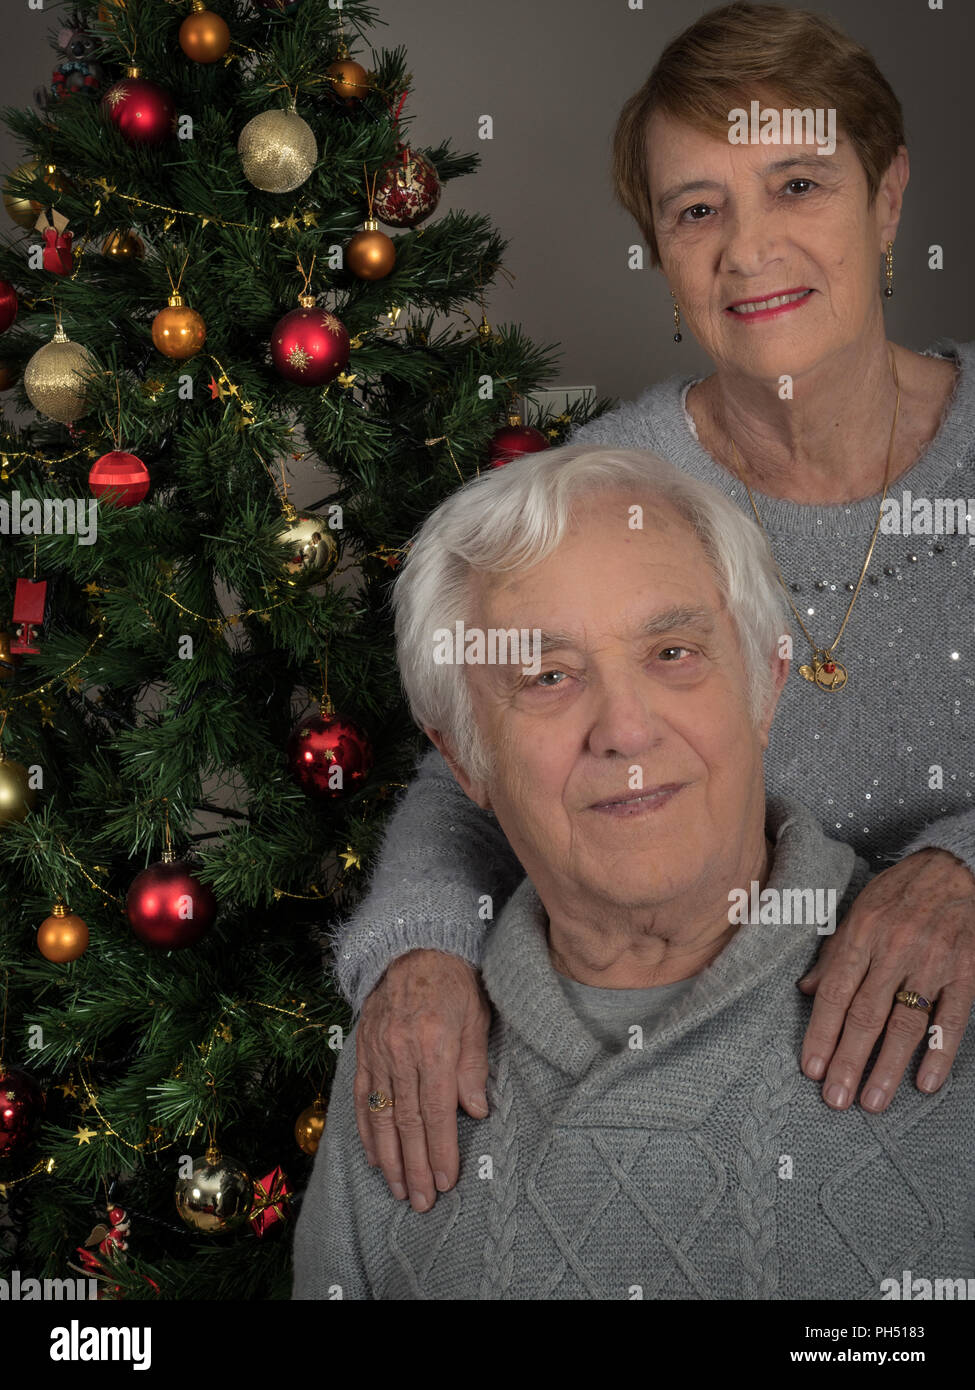 Horizontal portrait of an elderly couple by a Christmas tree Stock Photo